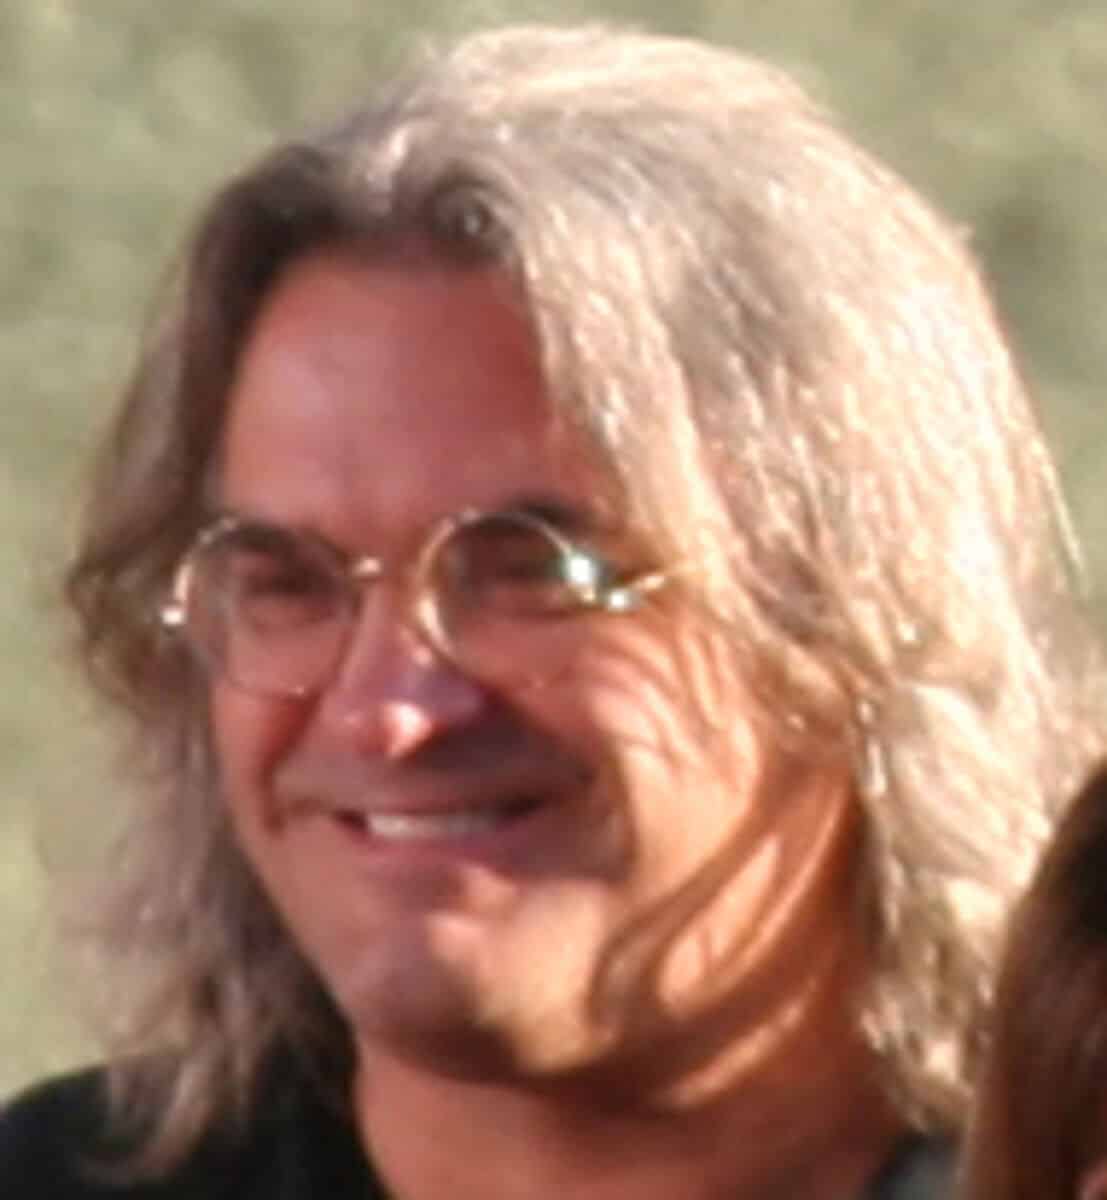 Paul Greengrass - Famous Television Producer